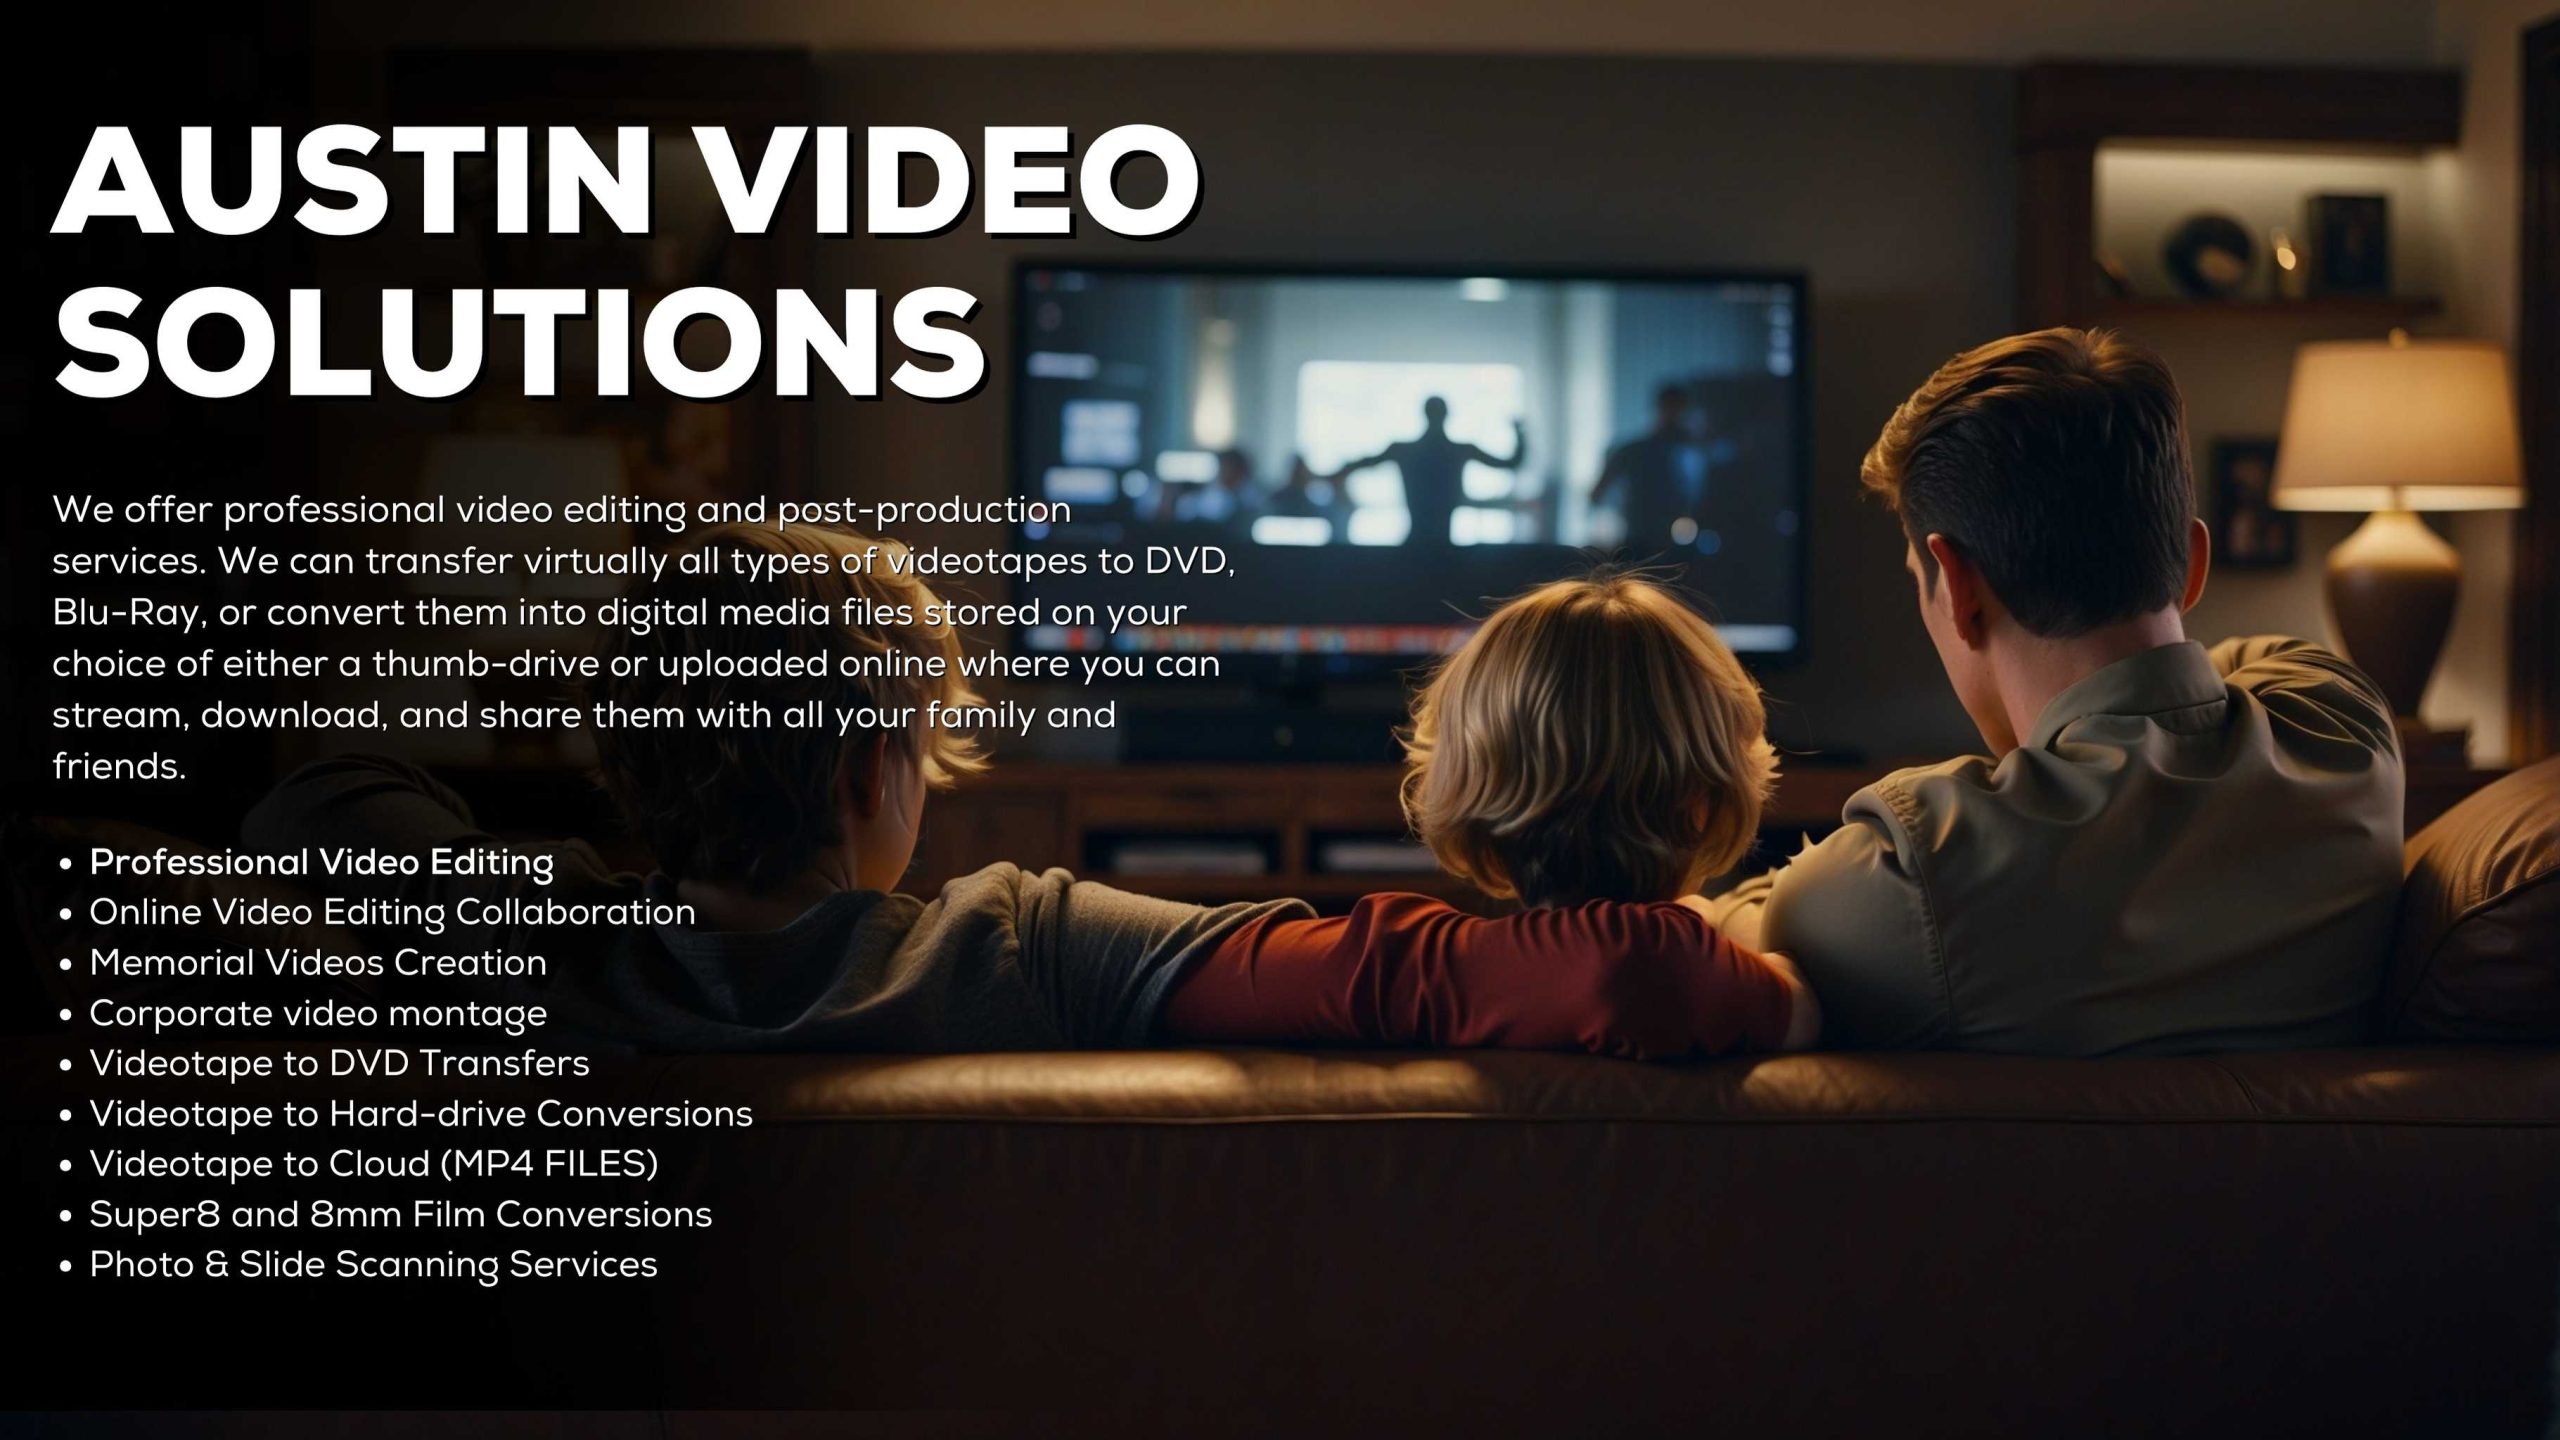 Austin Video Solutions - Professional Video Editing and Conversions Performing Video Digitization in Austin